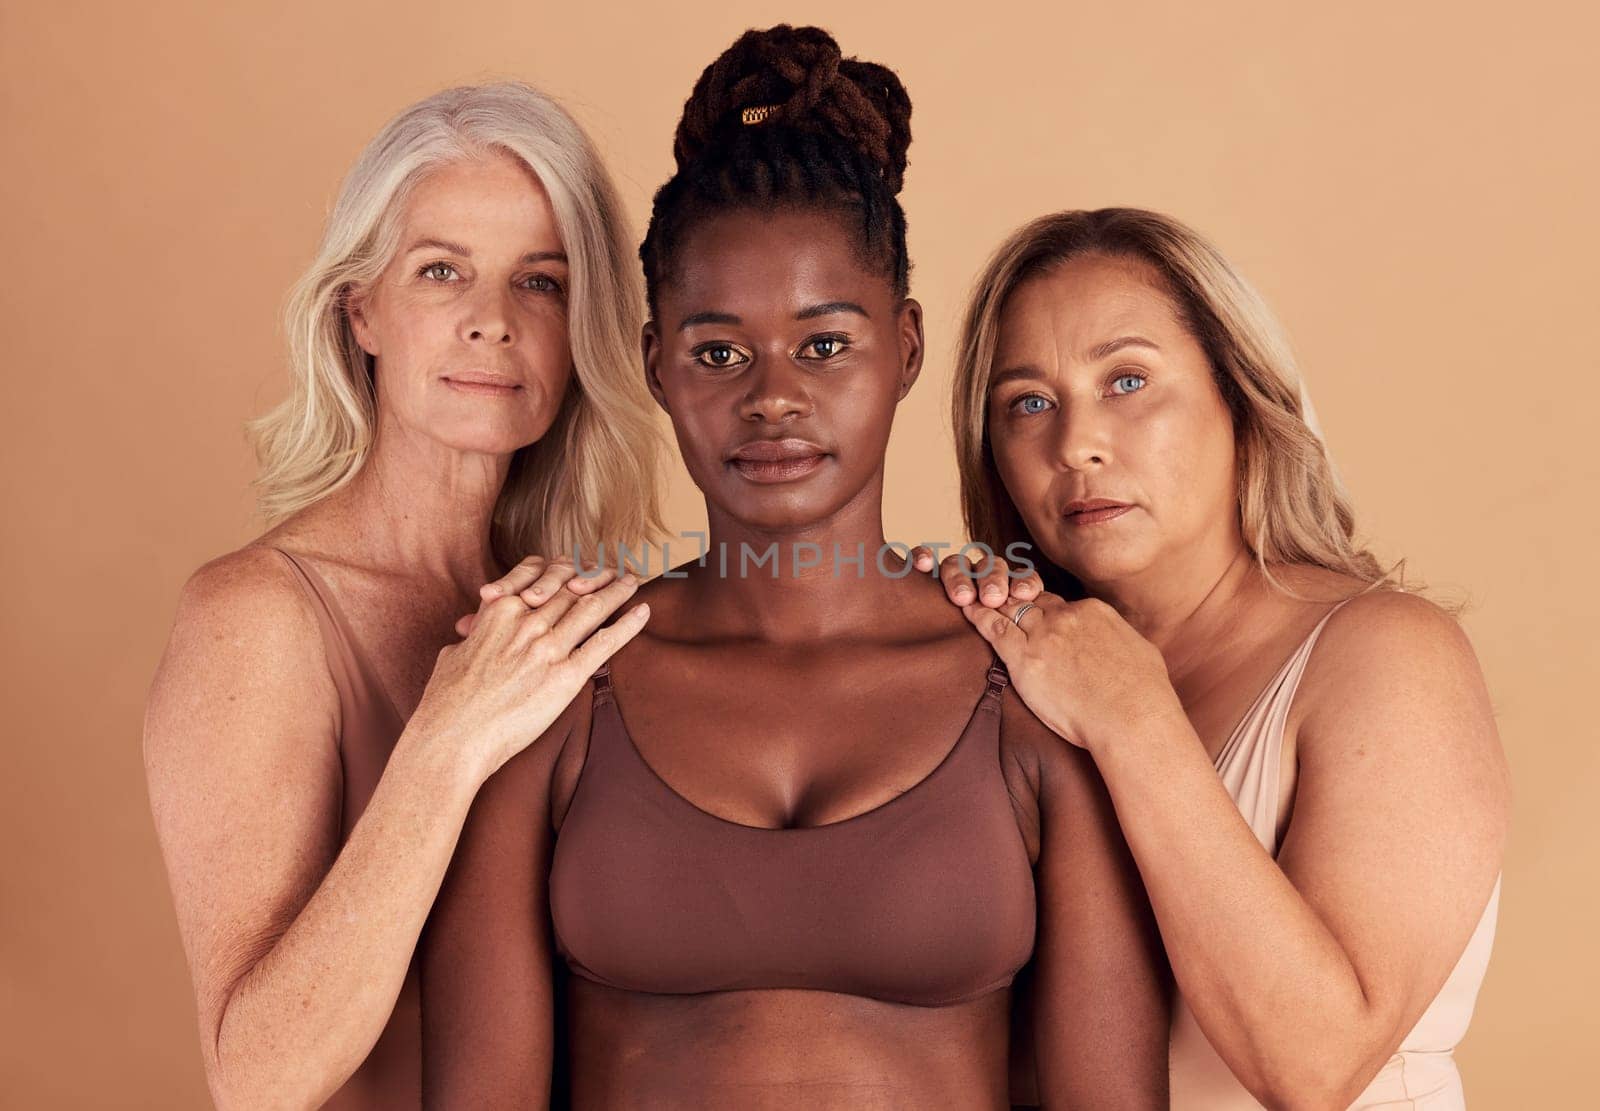 Women, natural body and diversity of beauty on studio background for skincare, cosmetics and empowerment. Portrait female group of people in underwear together for self love, community and confidence by YuriArcurs